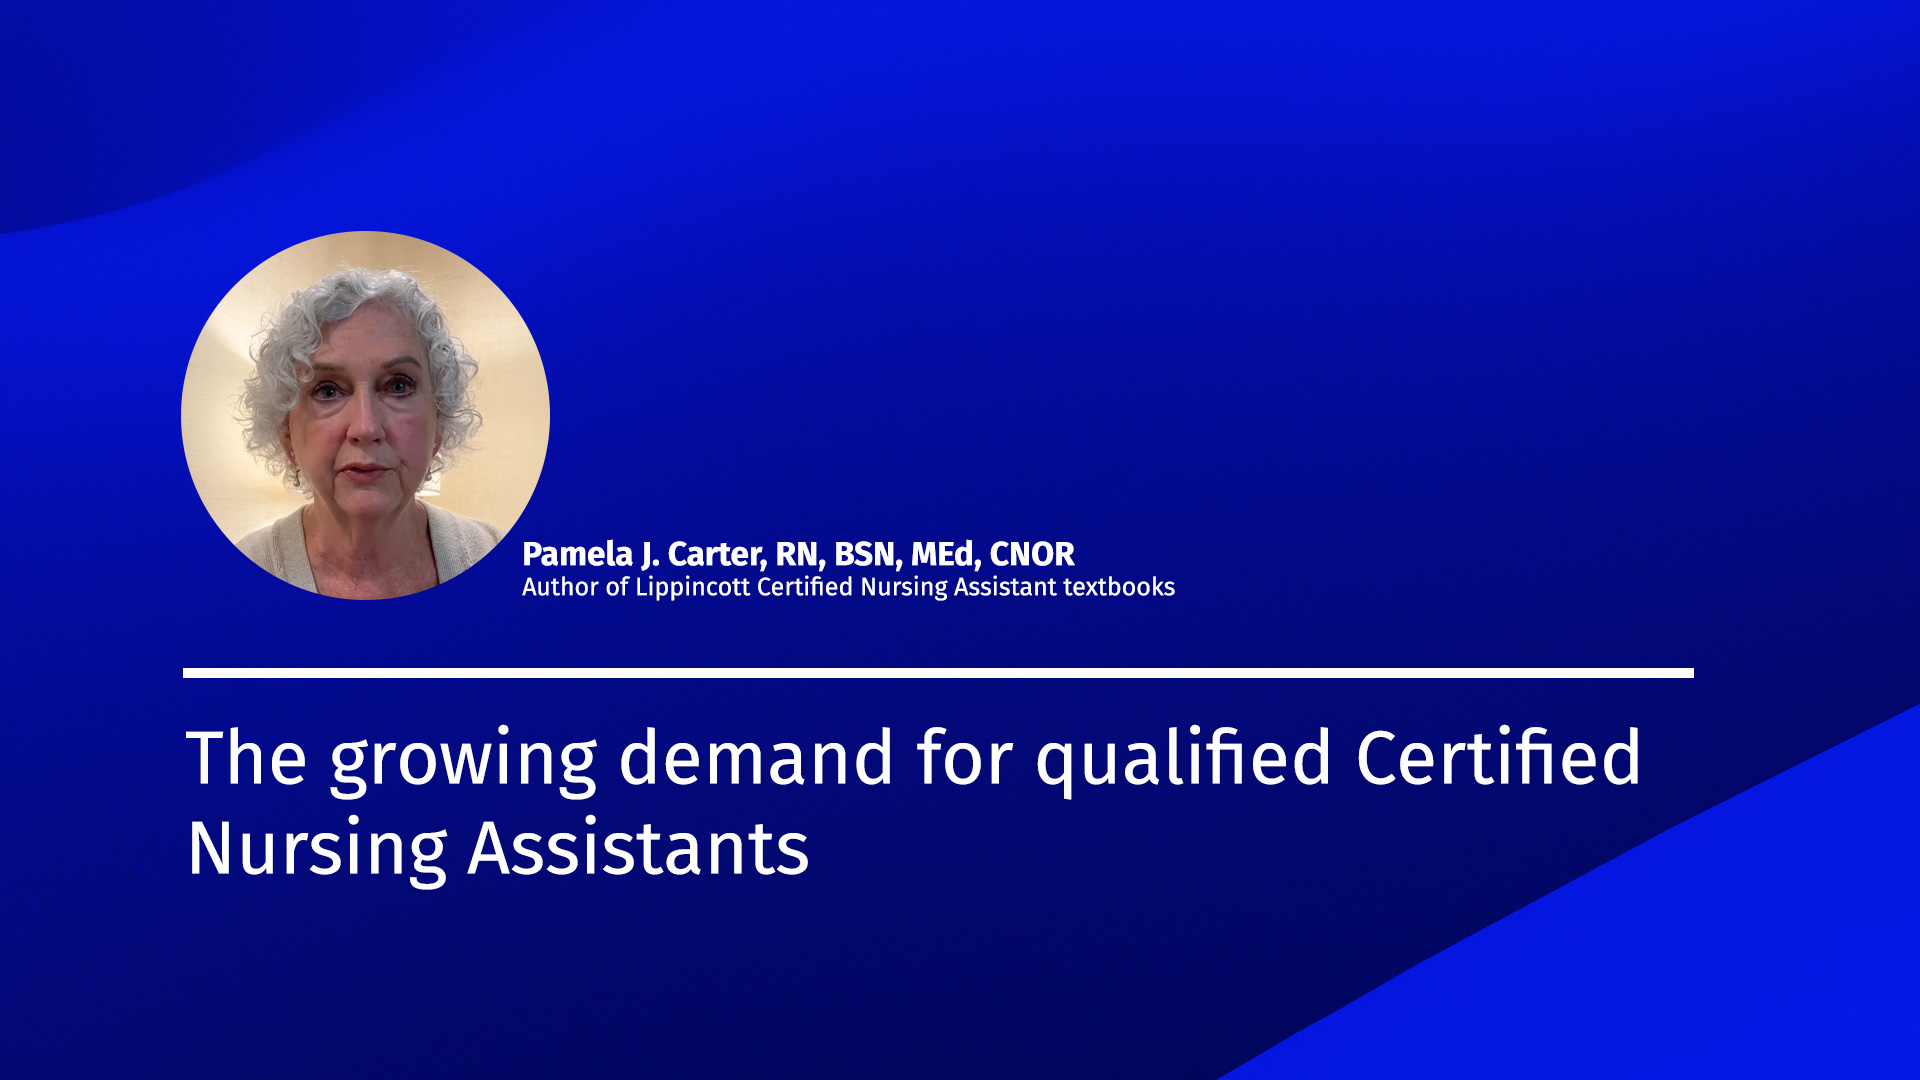 Pam Carter provides context for the gowing demand for qualified Certified Nursing Assistants